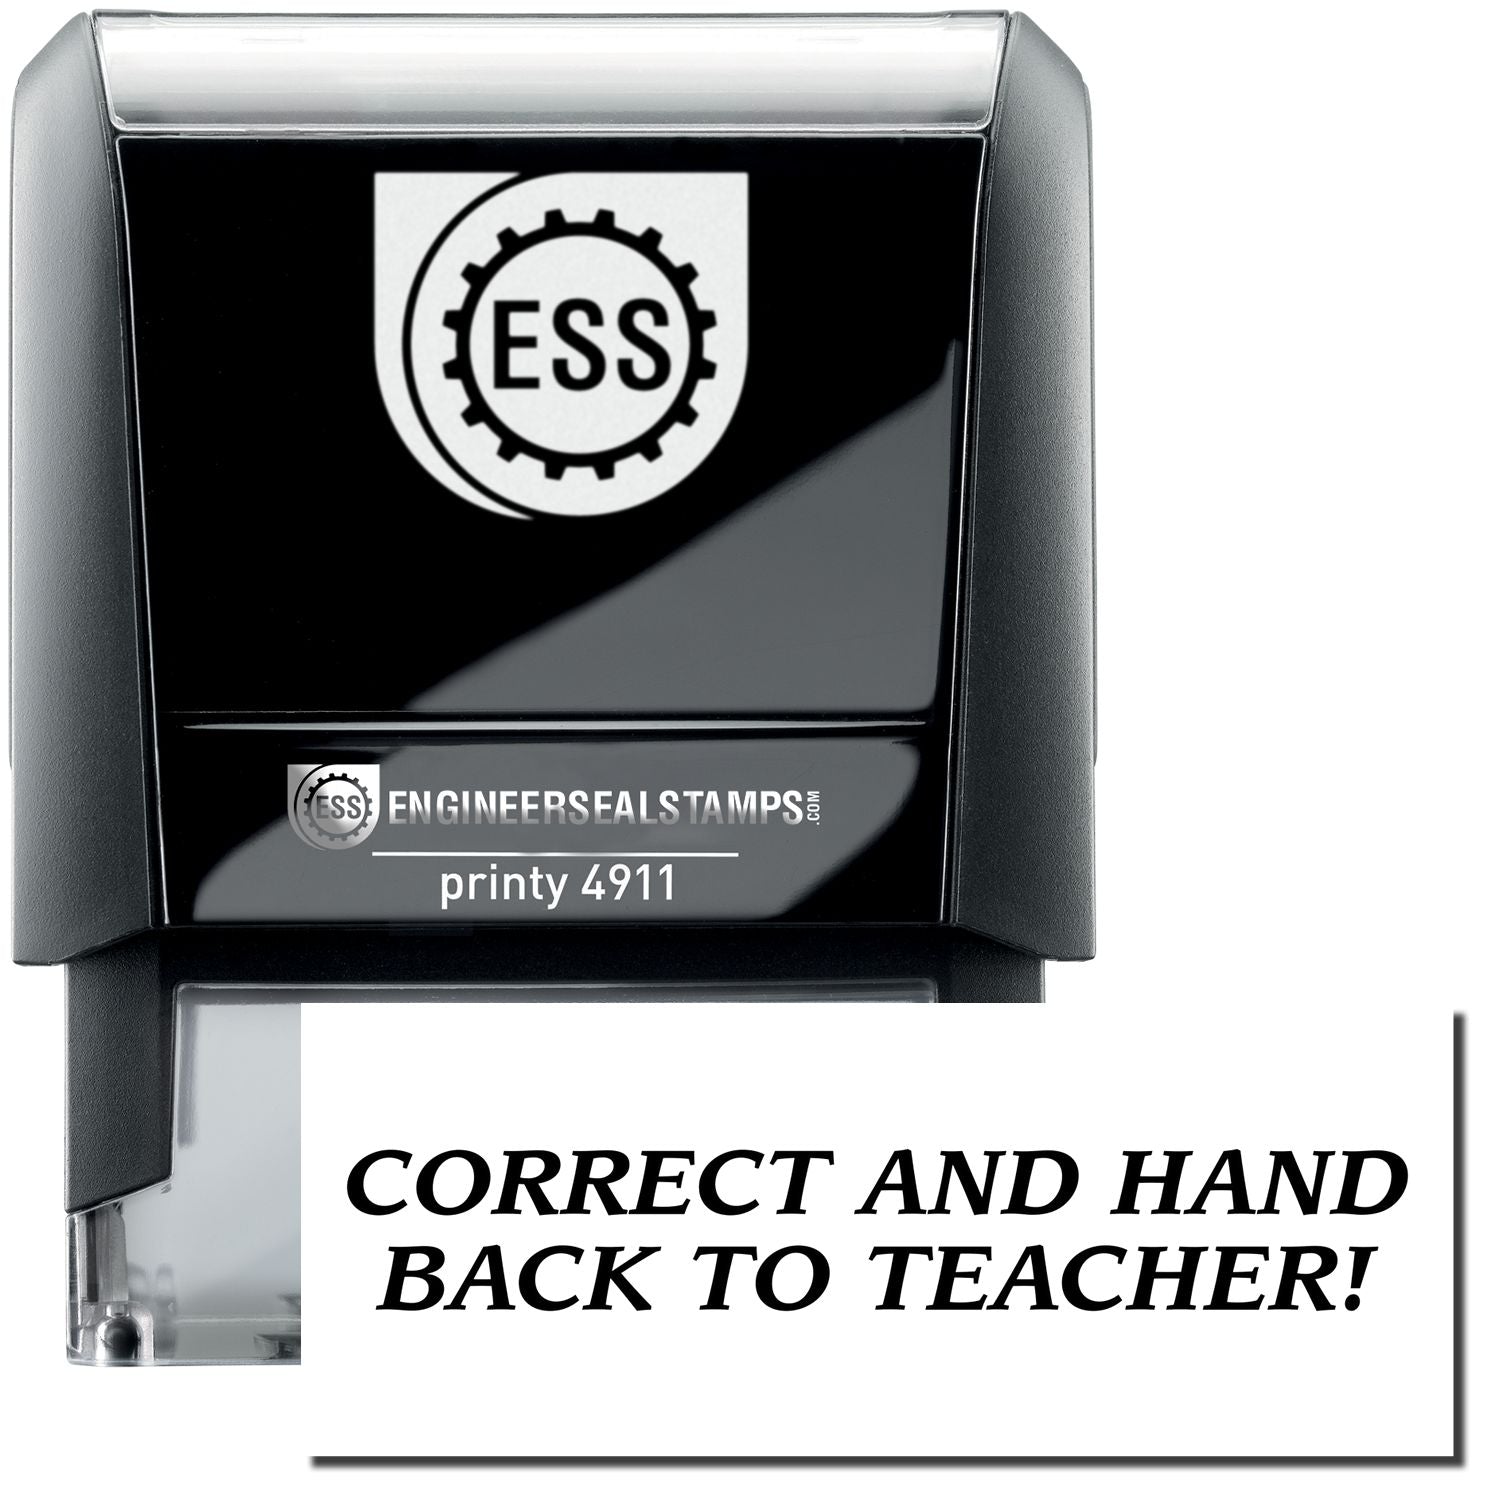 A self-inking stamp with a stamped image showing how the text "CORRECT AND HAND BACK TO TEACHER!" is displayed after stamping.